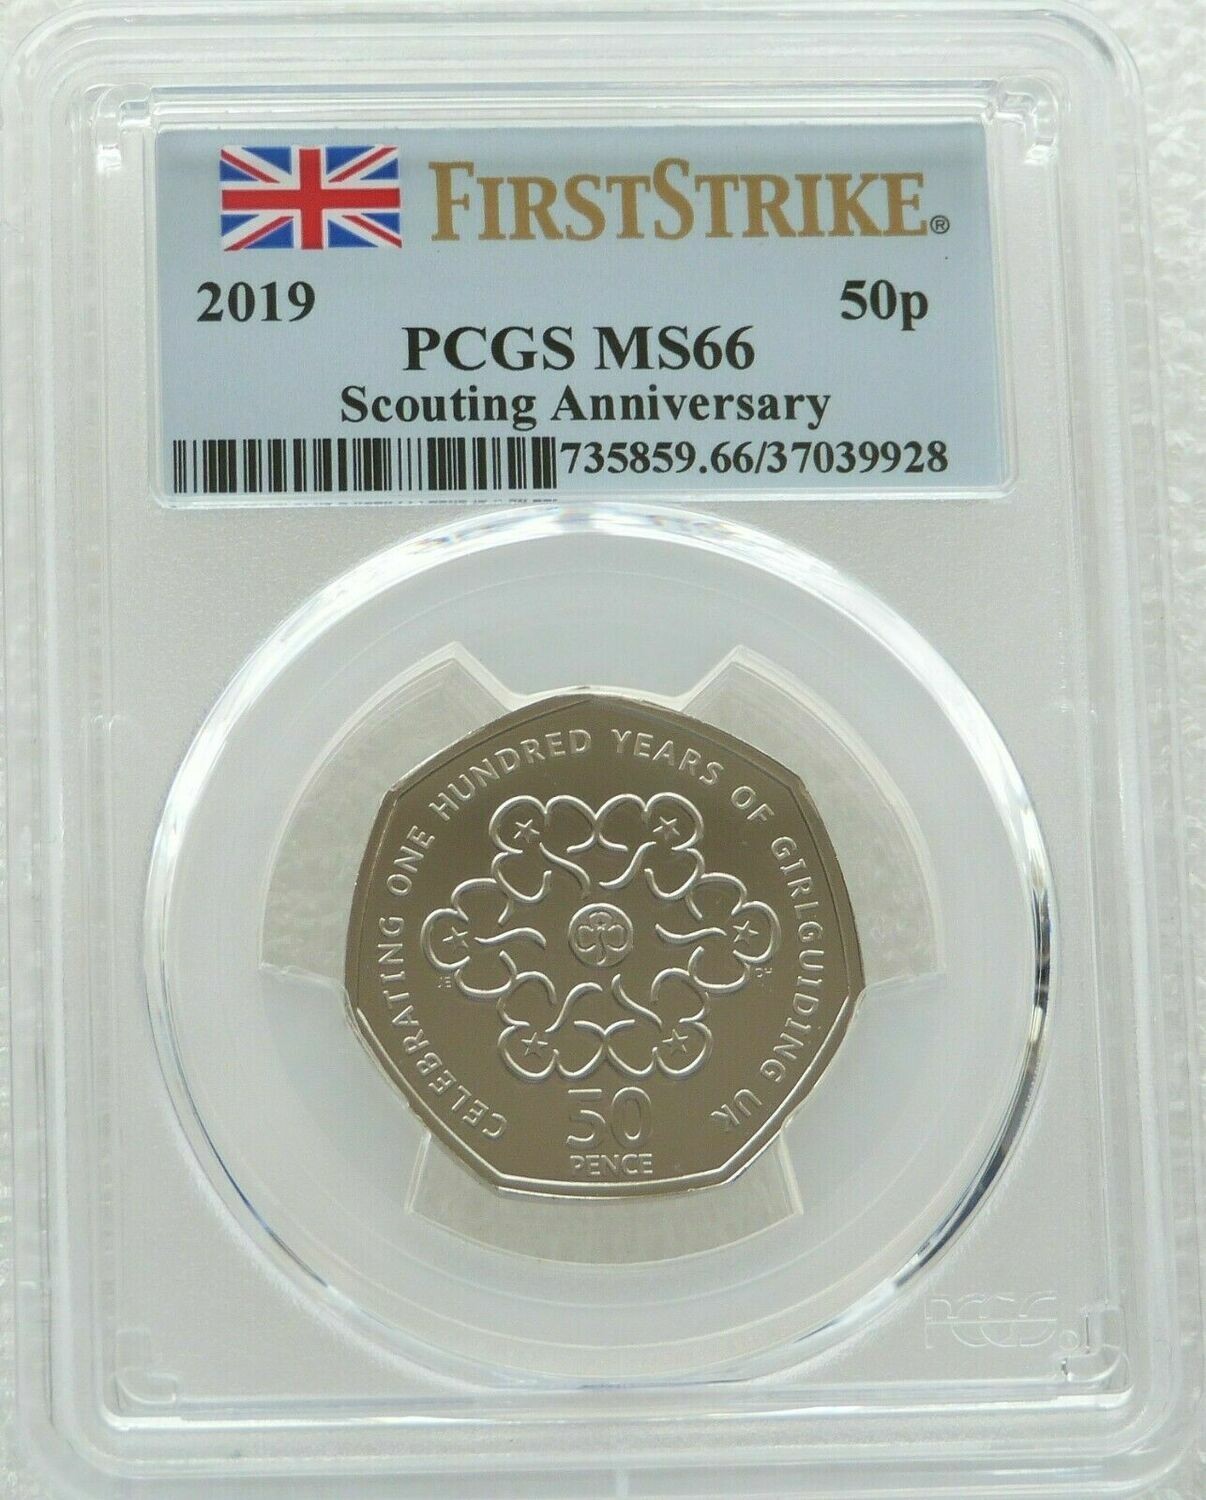 2019 Girlguiding 50p Brilliant Uncirculated Coin PCGS MS66 First Strike